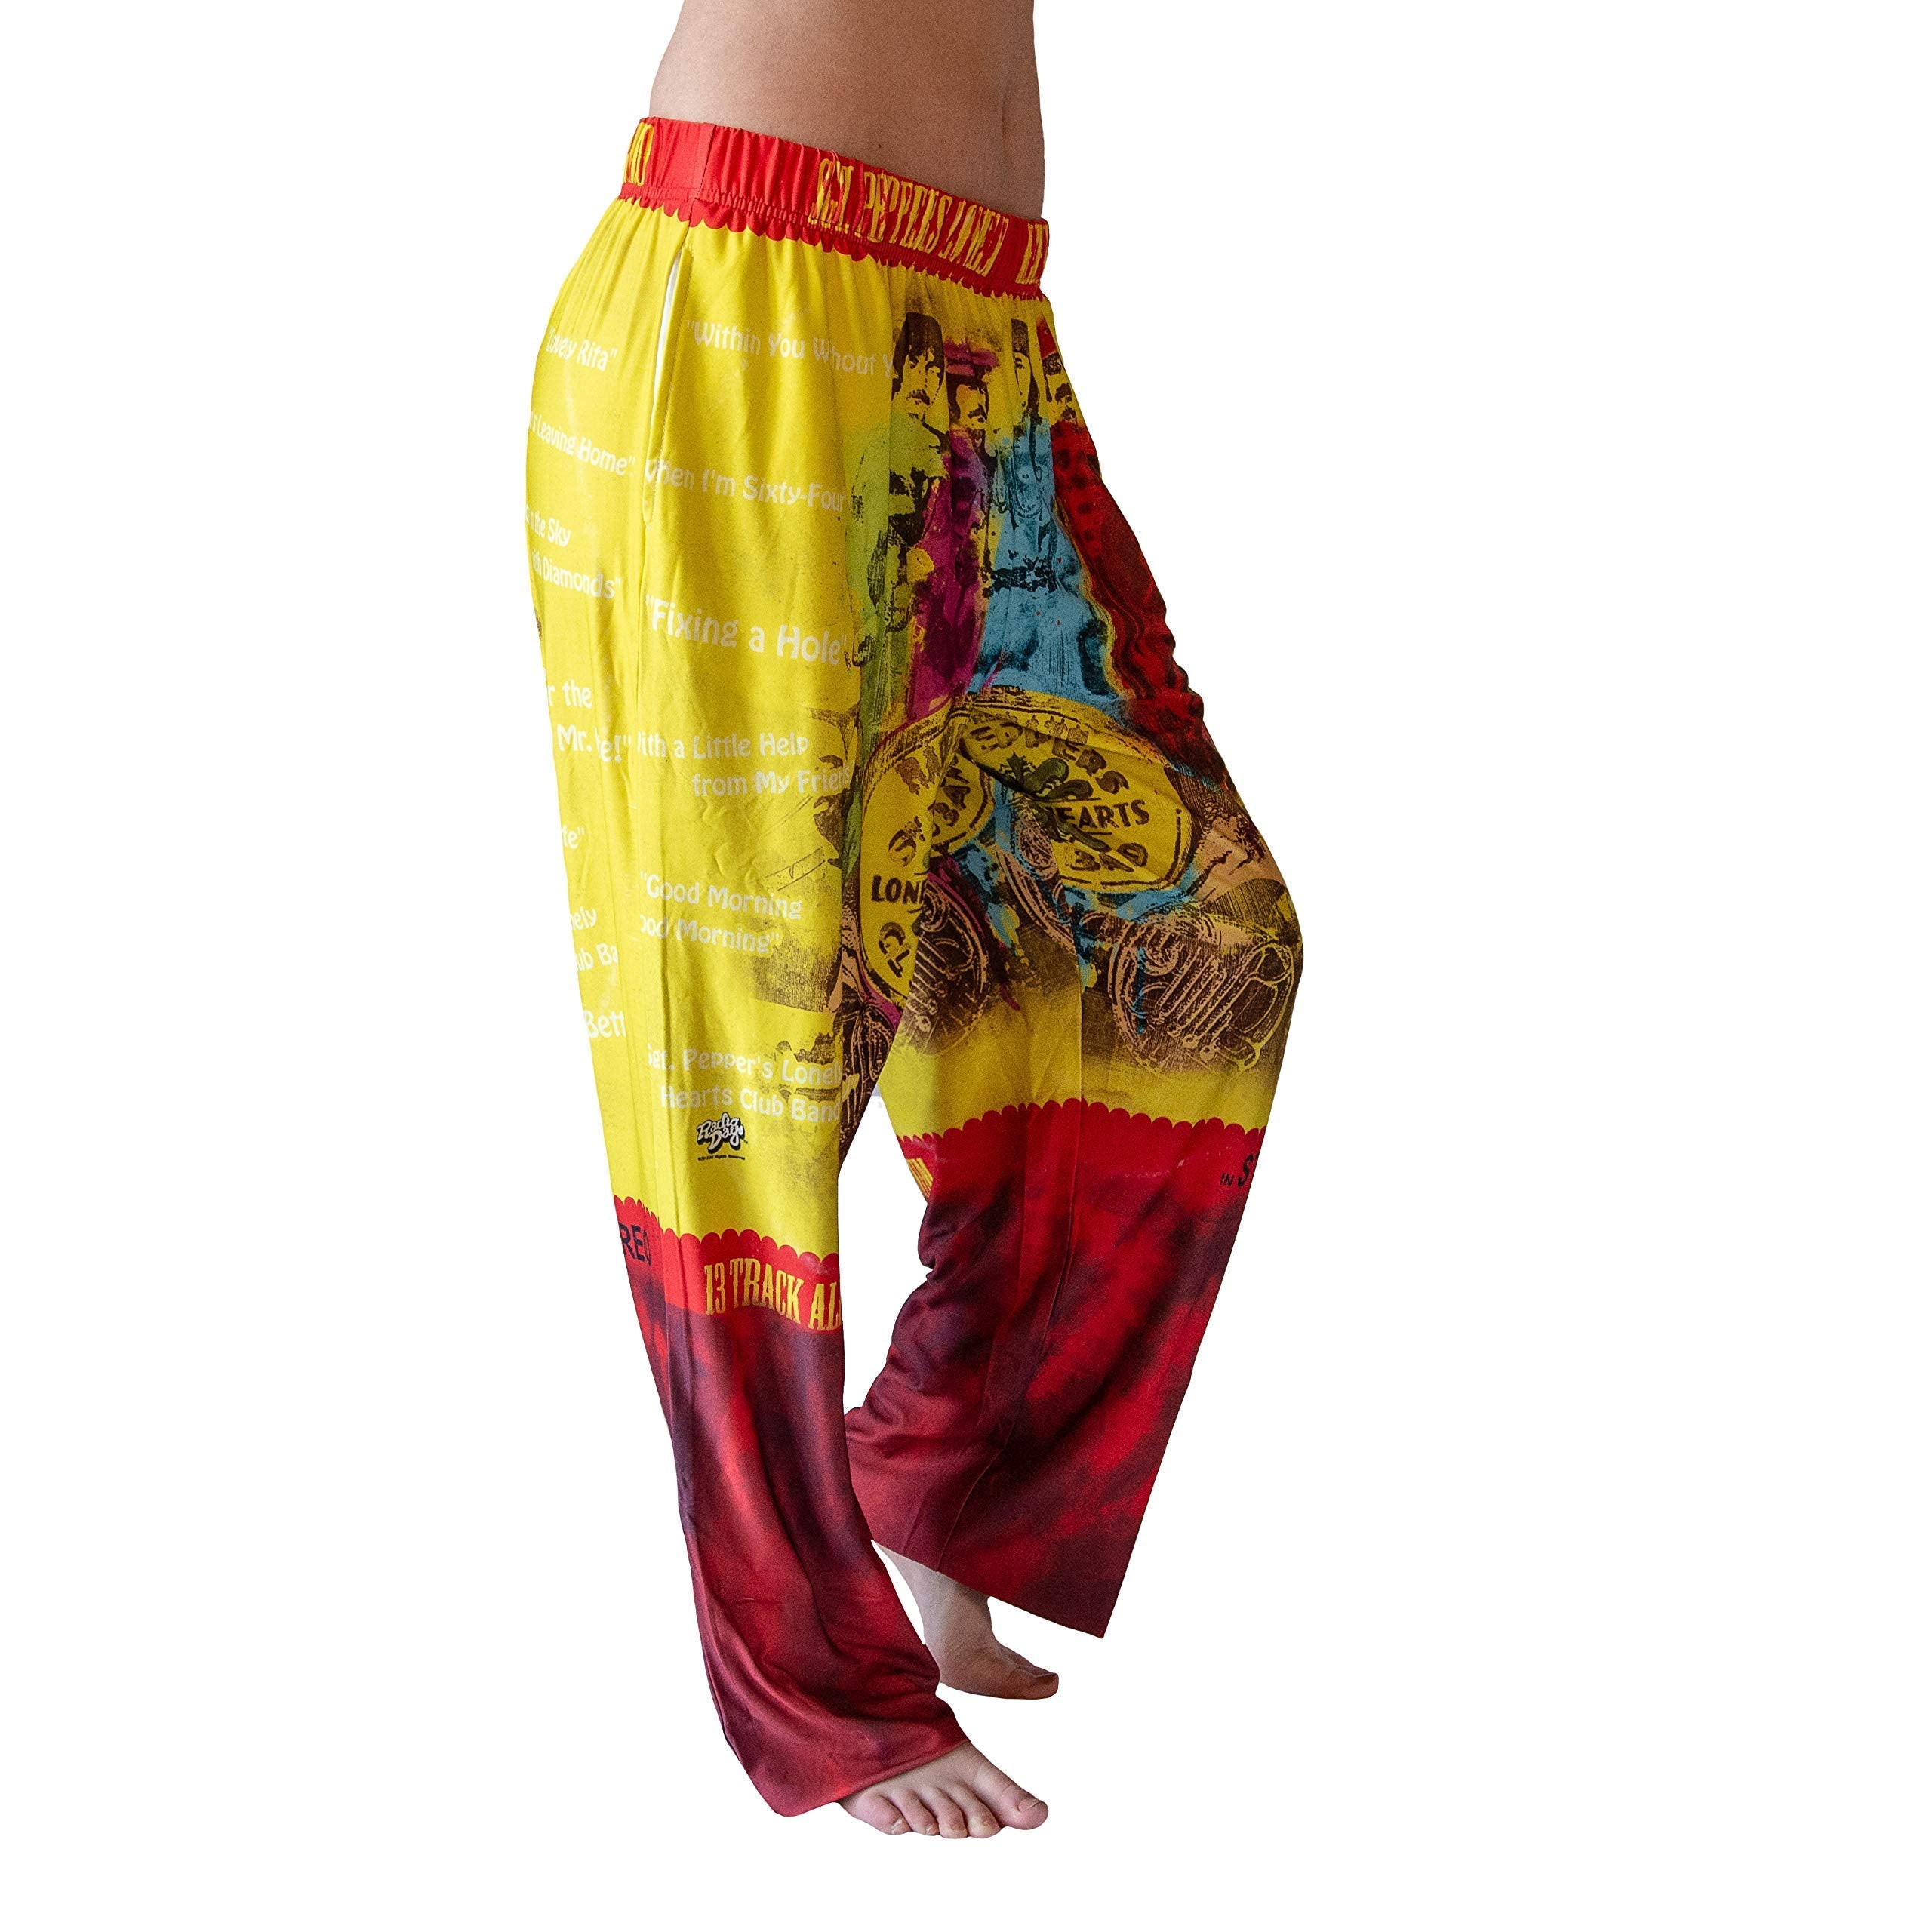 Waist down photo of model wearing Sgt. Peppers pajama lounge pants side view (white background)